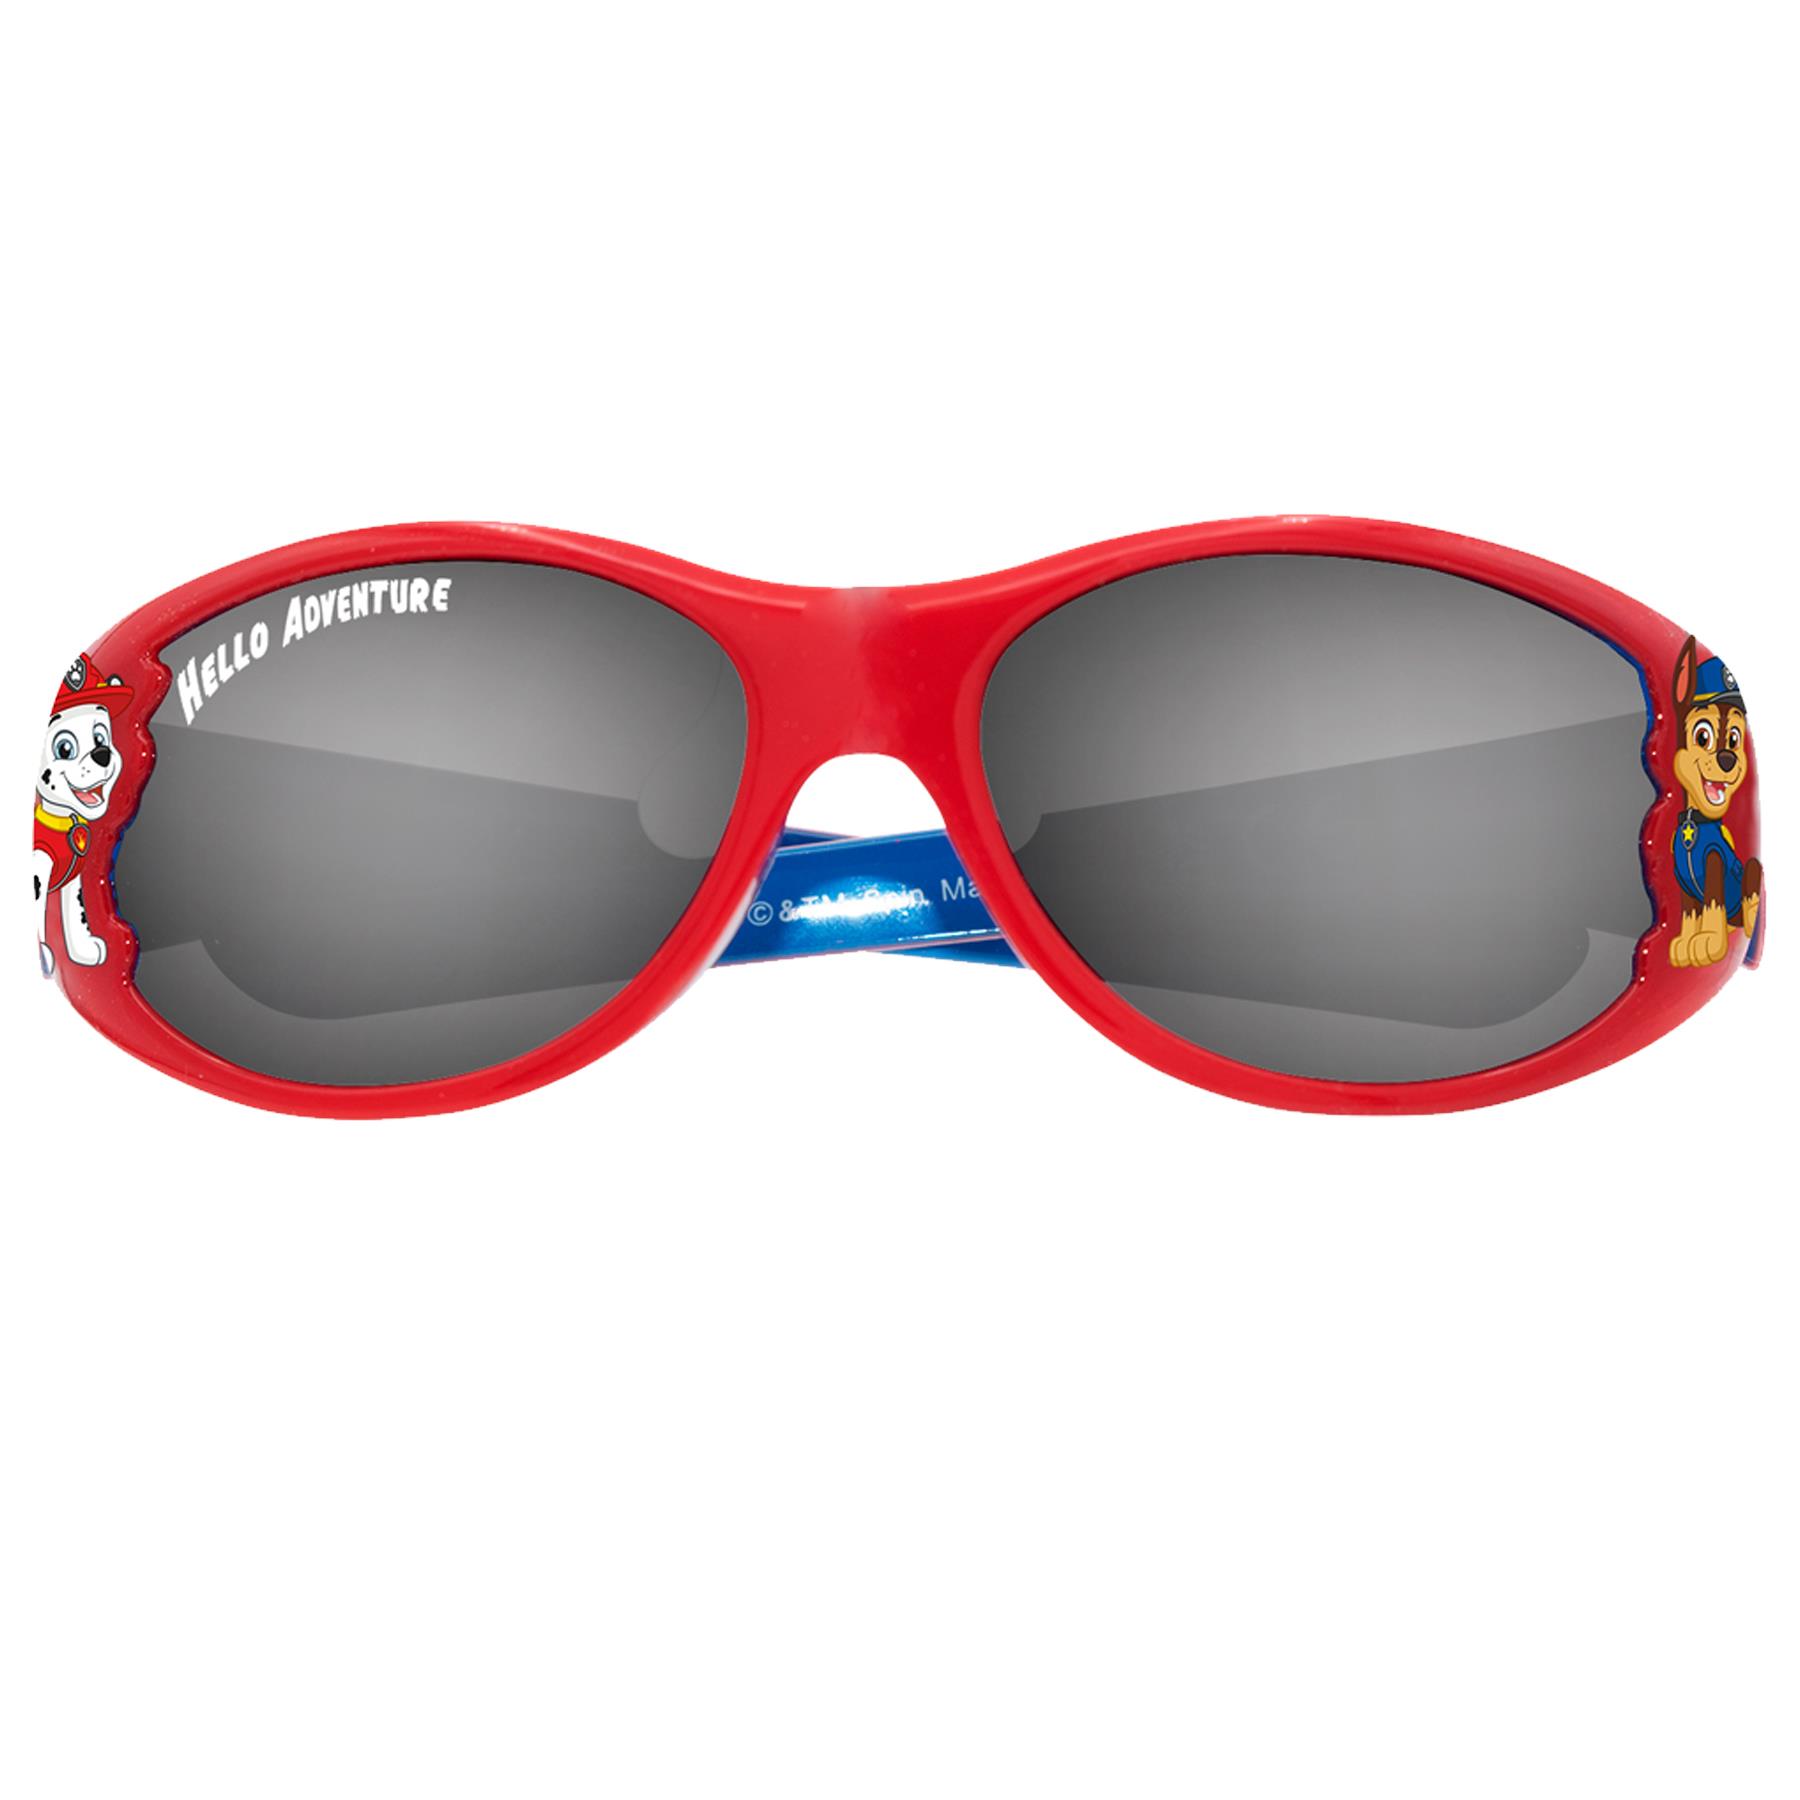 Paw Patrol Children's Sunglasses UV protection for Holiday - PAW16